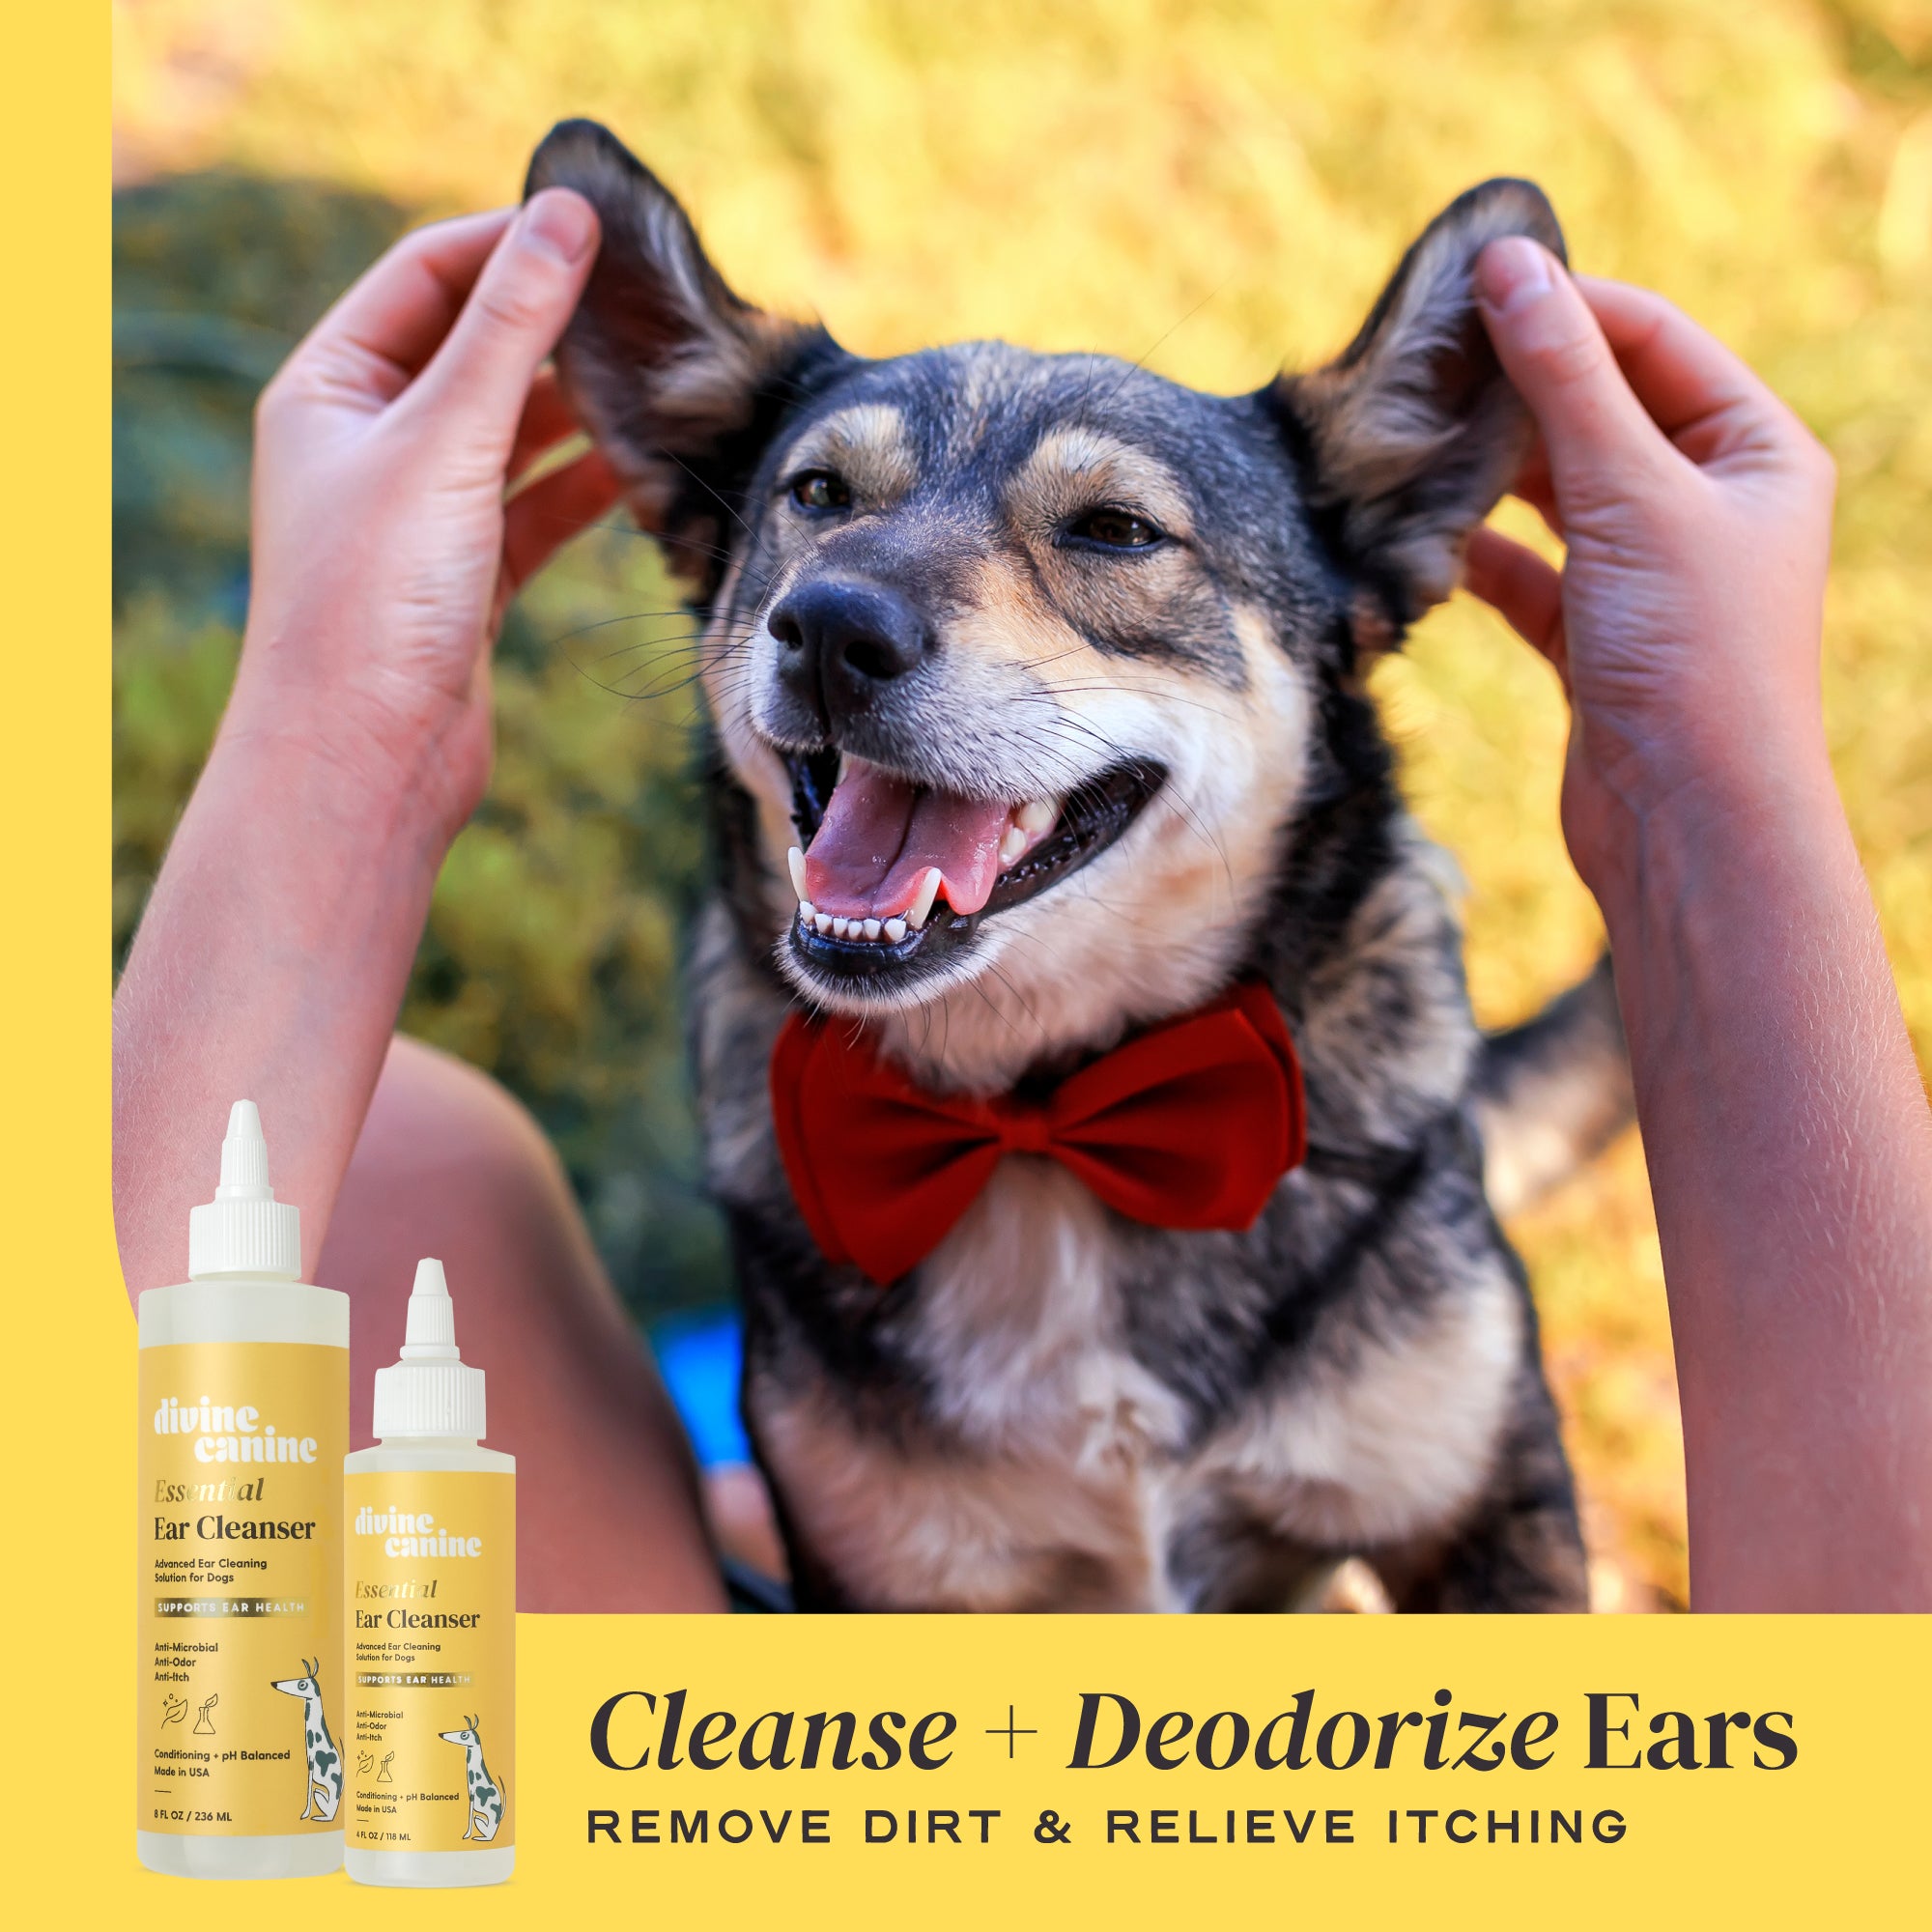 cleaning dog ears using Essential Ear Cleanser